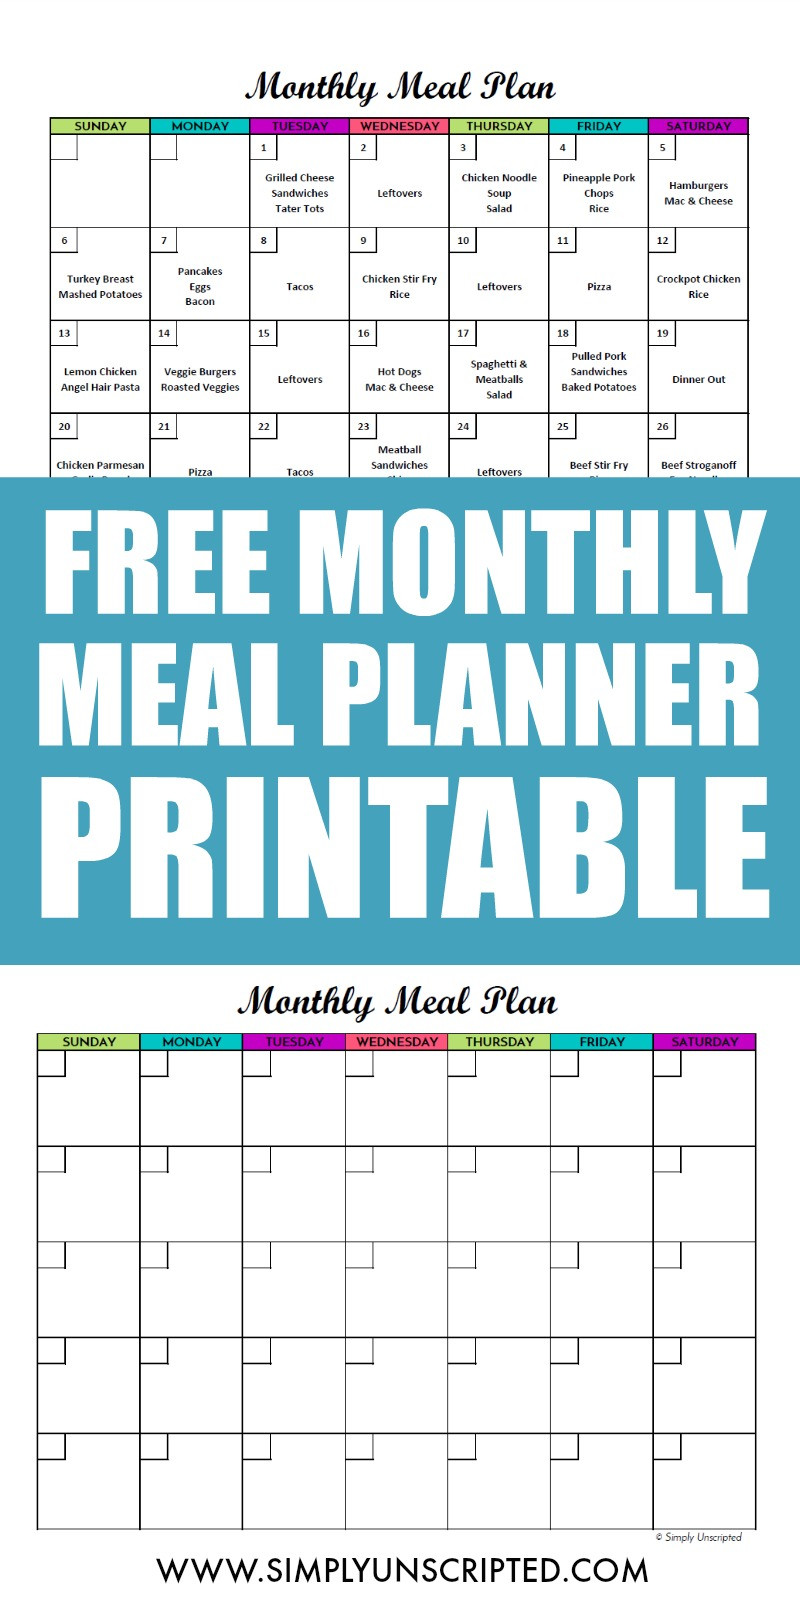 Meal Plan Calendar Template Monthly Meal Planner Printable Simply Unscripted